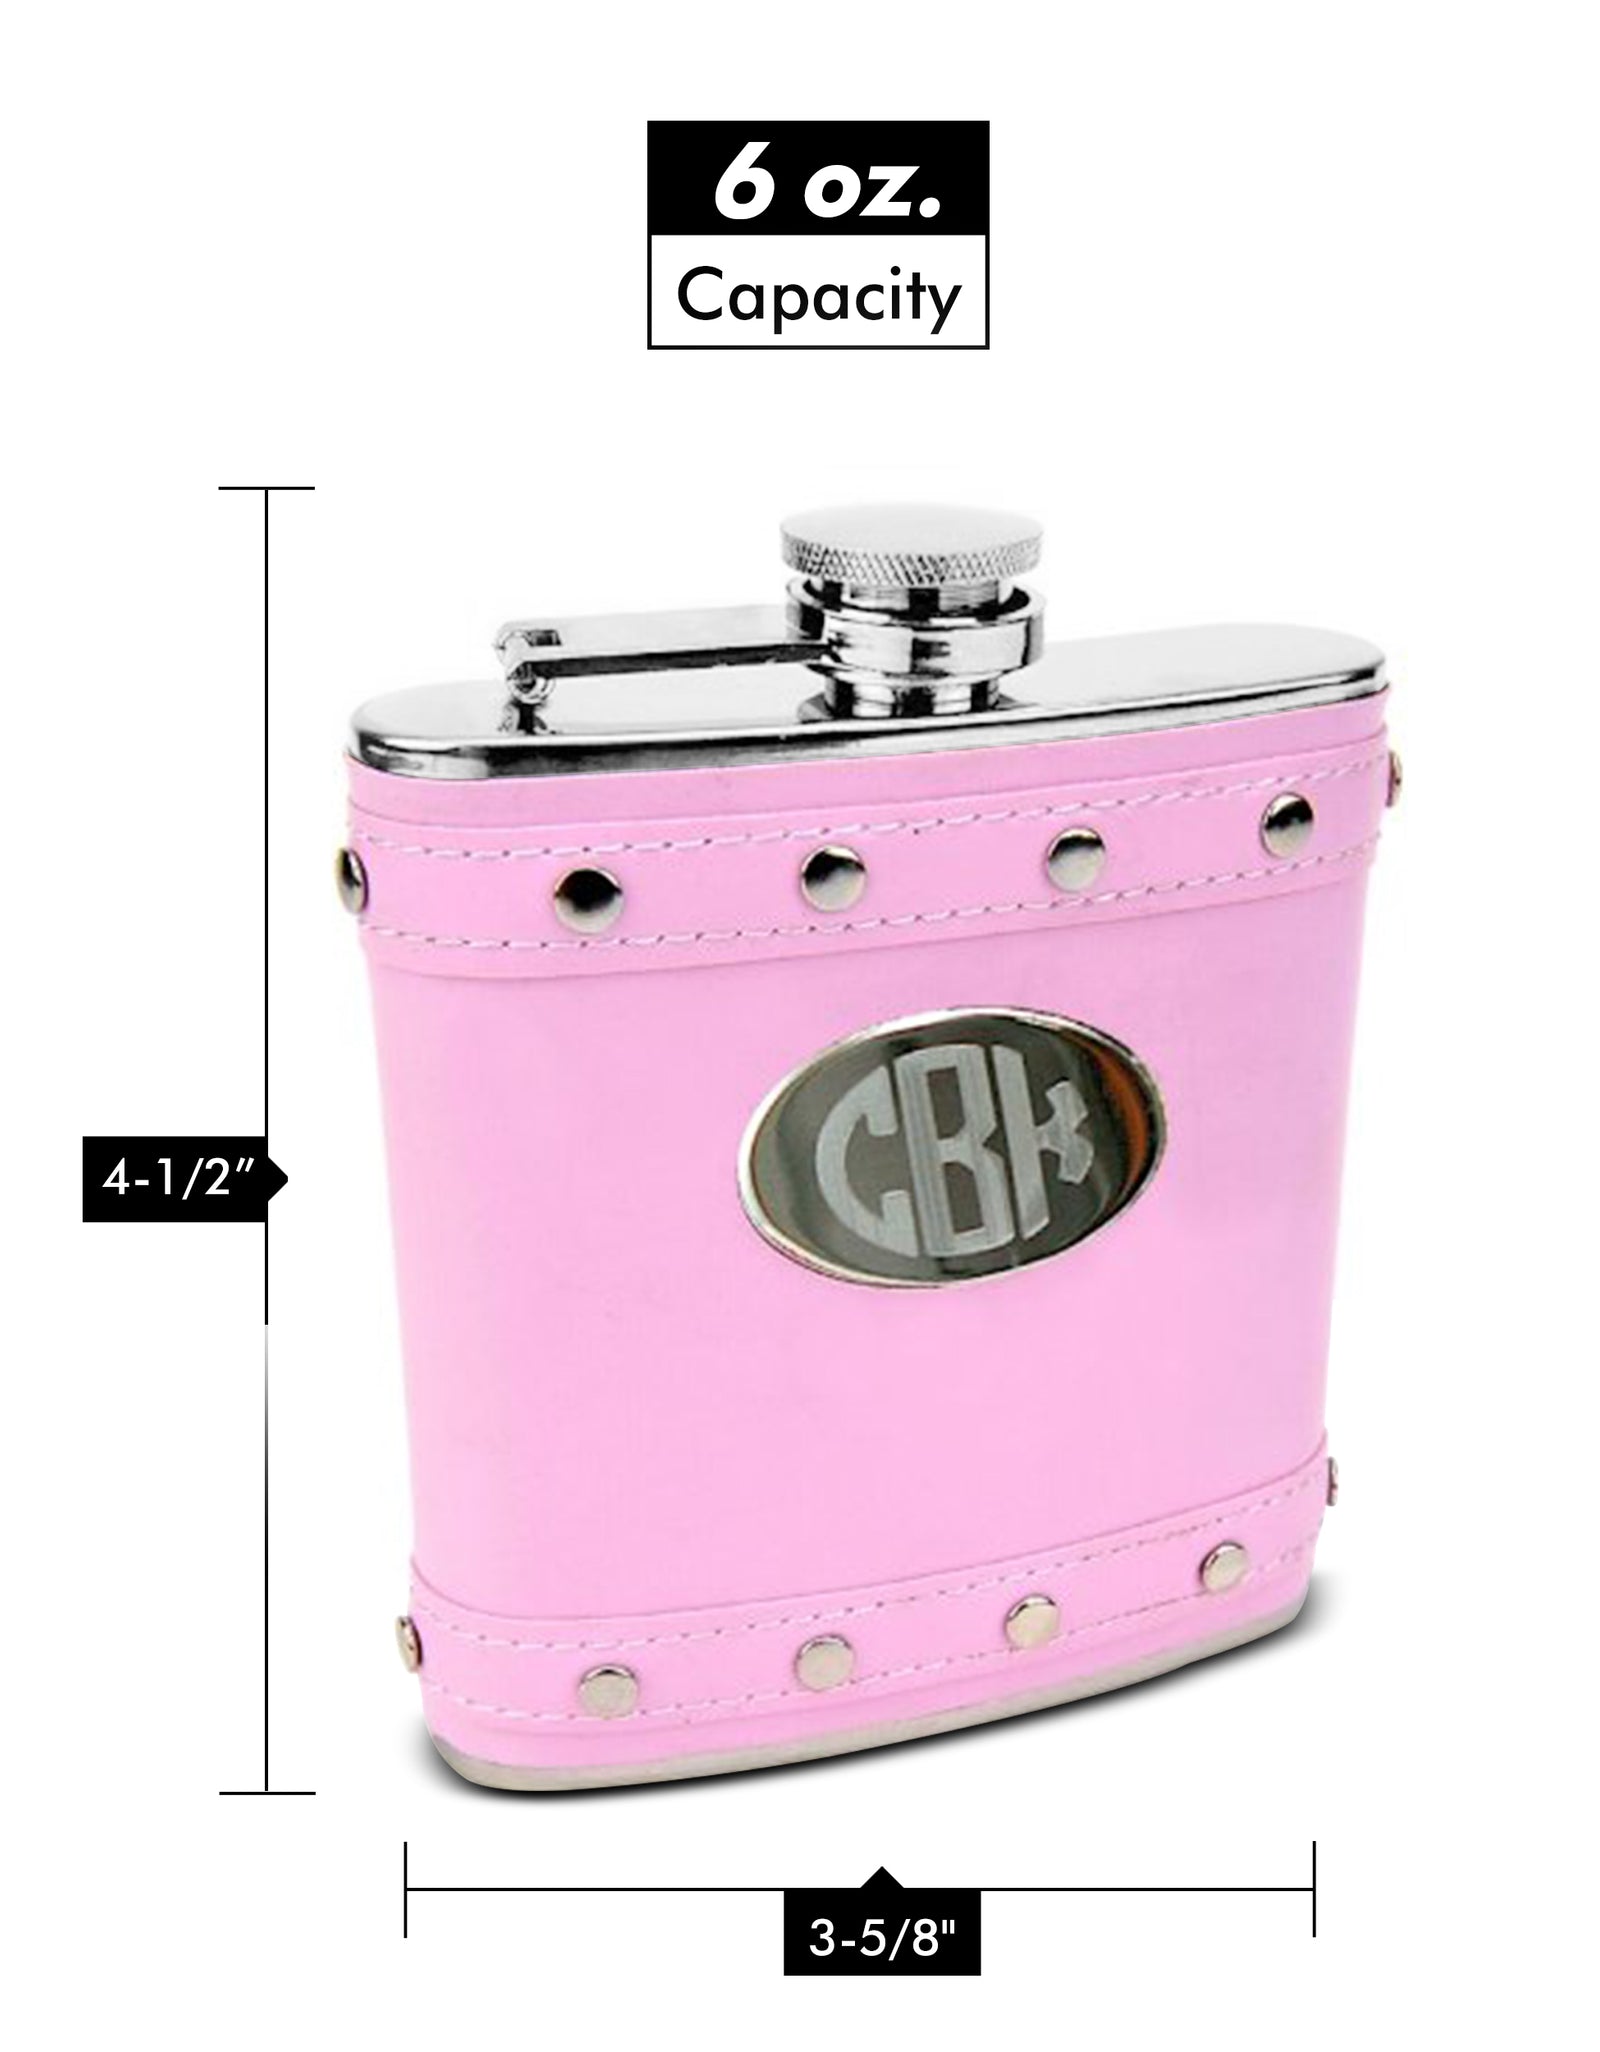 Silver Stud Hip Flask with Pink Faux Leather